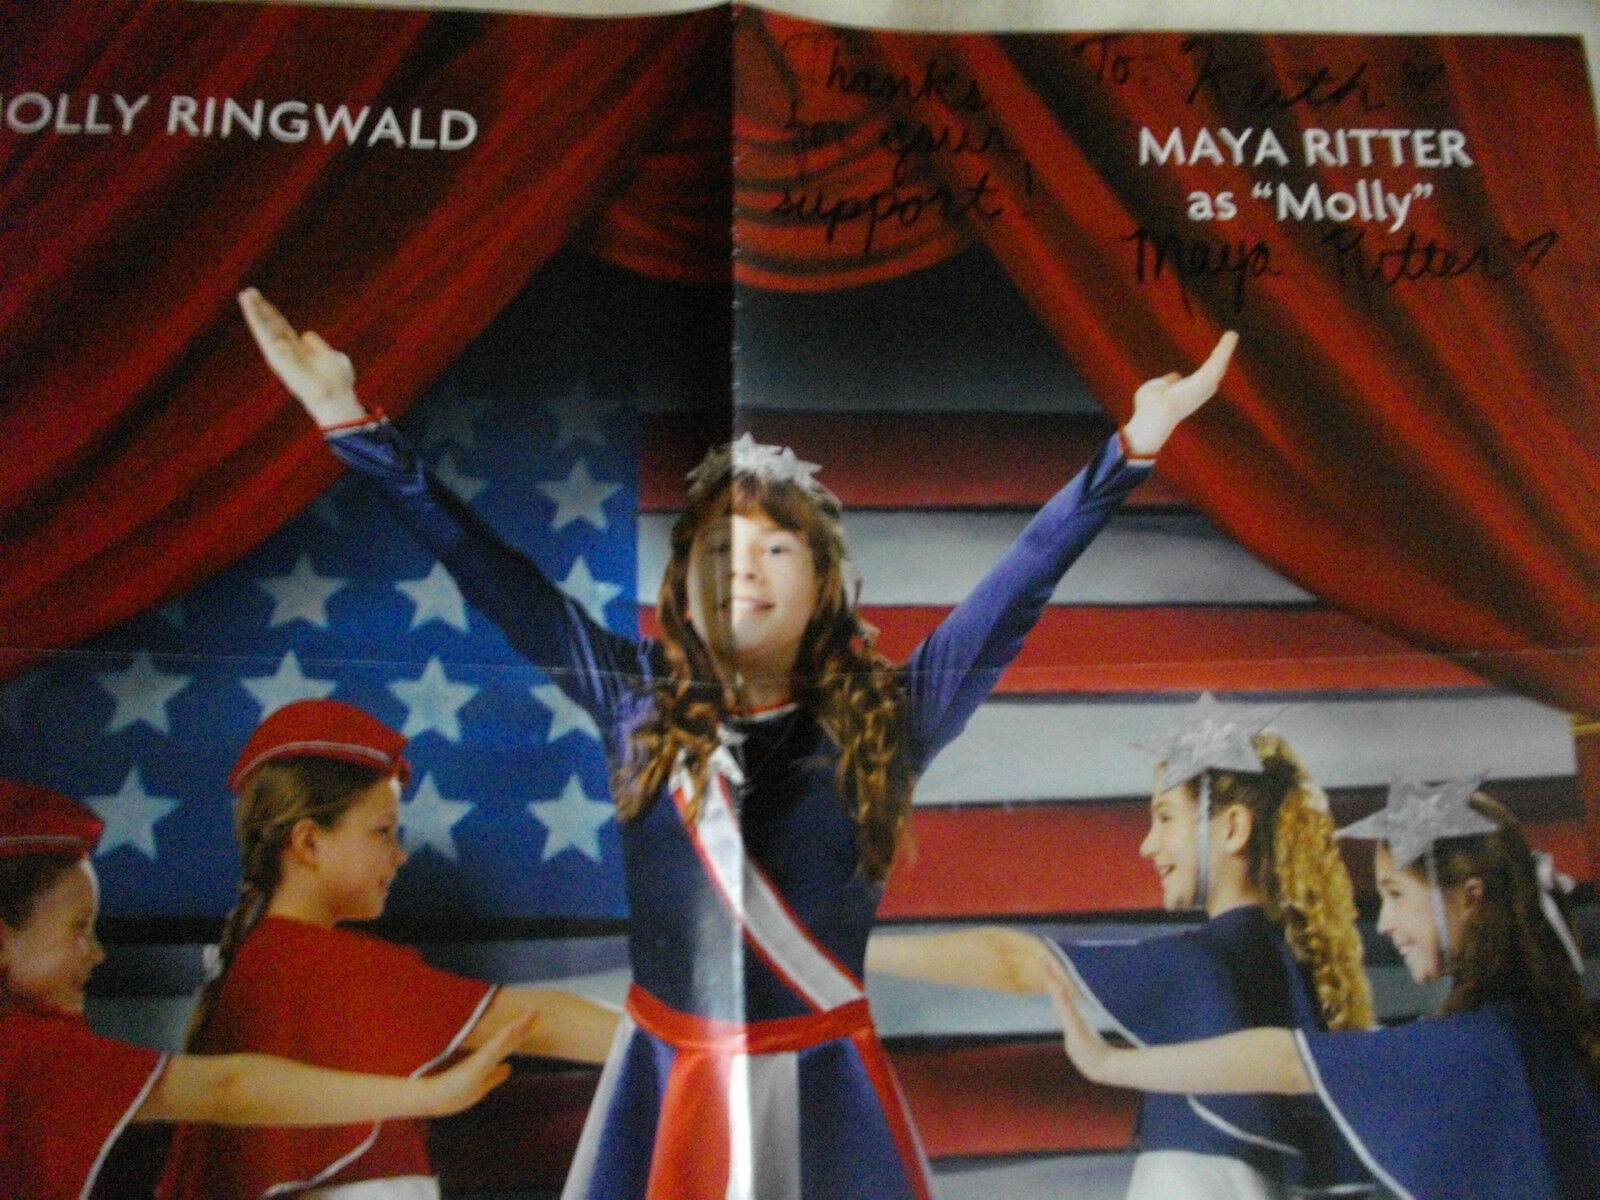 MAYA RITTER AUTOGRAPHED MOVIE POSTER for MOLLY. Cheap to clear